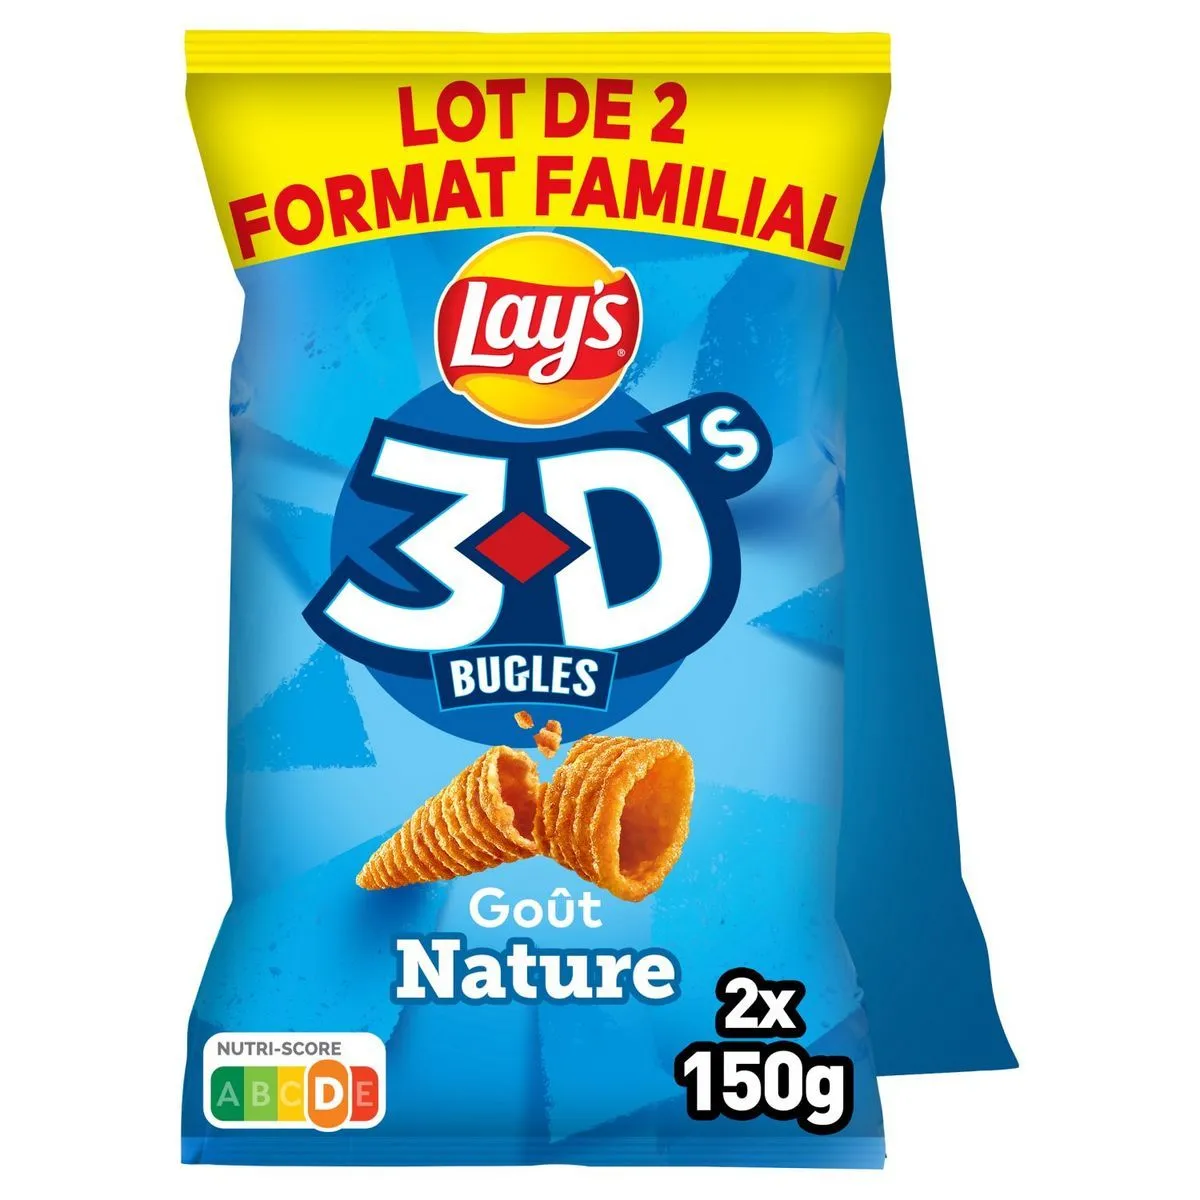 3d's bugles nature format familial lay's